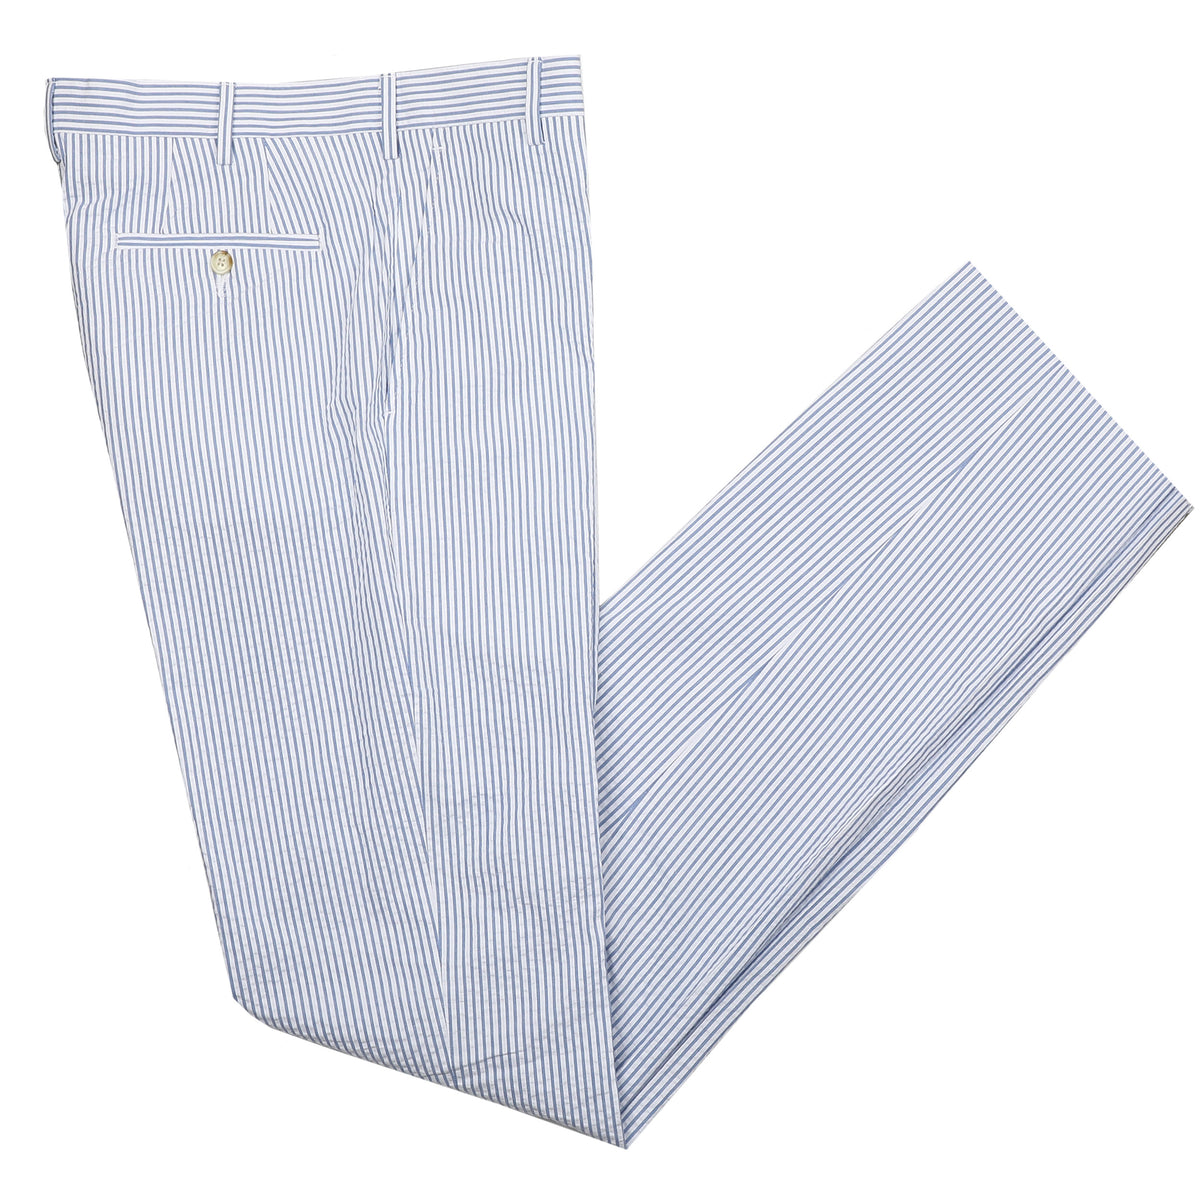 Experience the breezy, classic charm of our Algiers Navy / White Seersucker Pant. These stunning New Orleans-inspired trousers are perfect for your next summer outing. Cut from lightweight seersucker fabric, they combine timeless Tan and White stripes with a relaxed fit for unbeatable comfort and style. Try them this season for a look that radiates effortless elegance!  100% Cotton Seersucker • Algiers Fit • Flat Front • Tab Button Closure • Unfinished Bottom (37.5&quot;) • Dry Clean • Imported